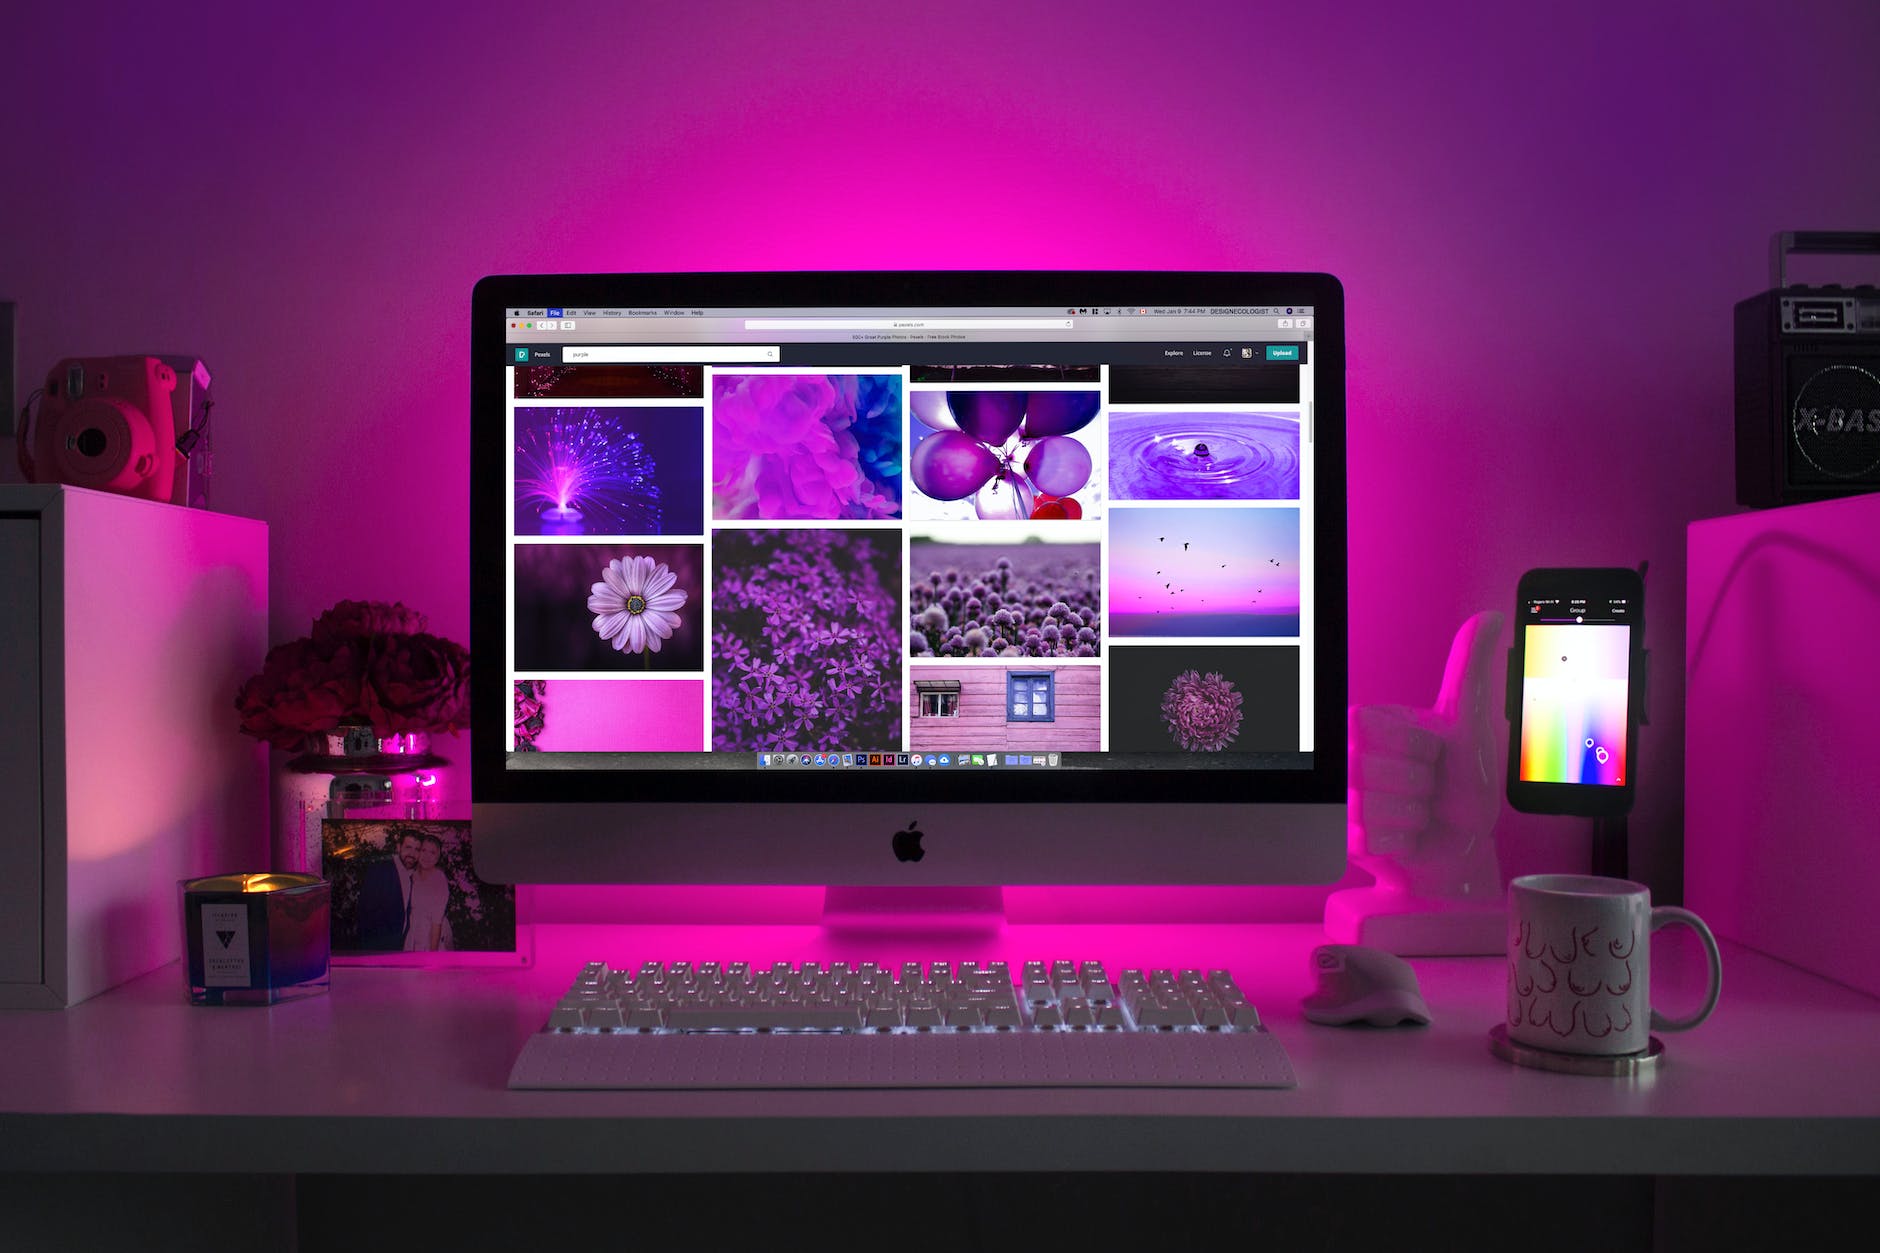 Imac with beautiful images